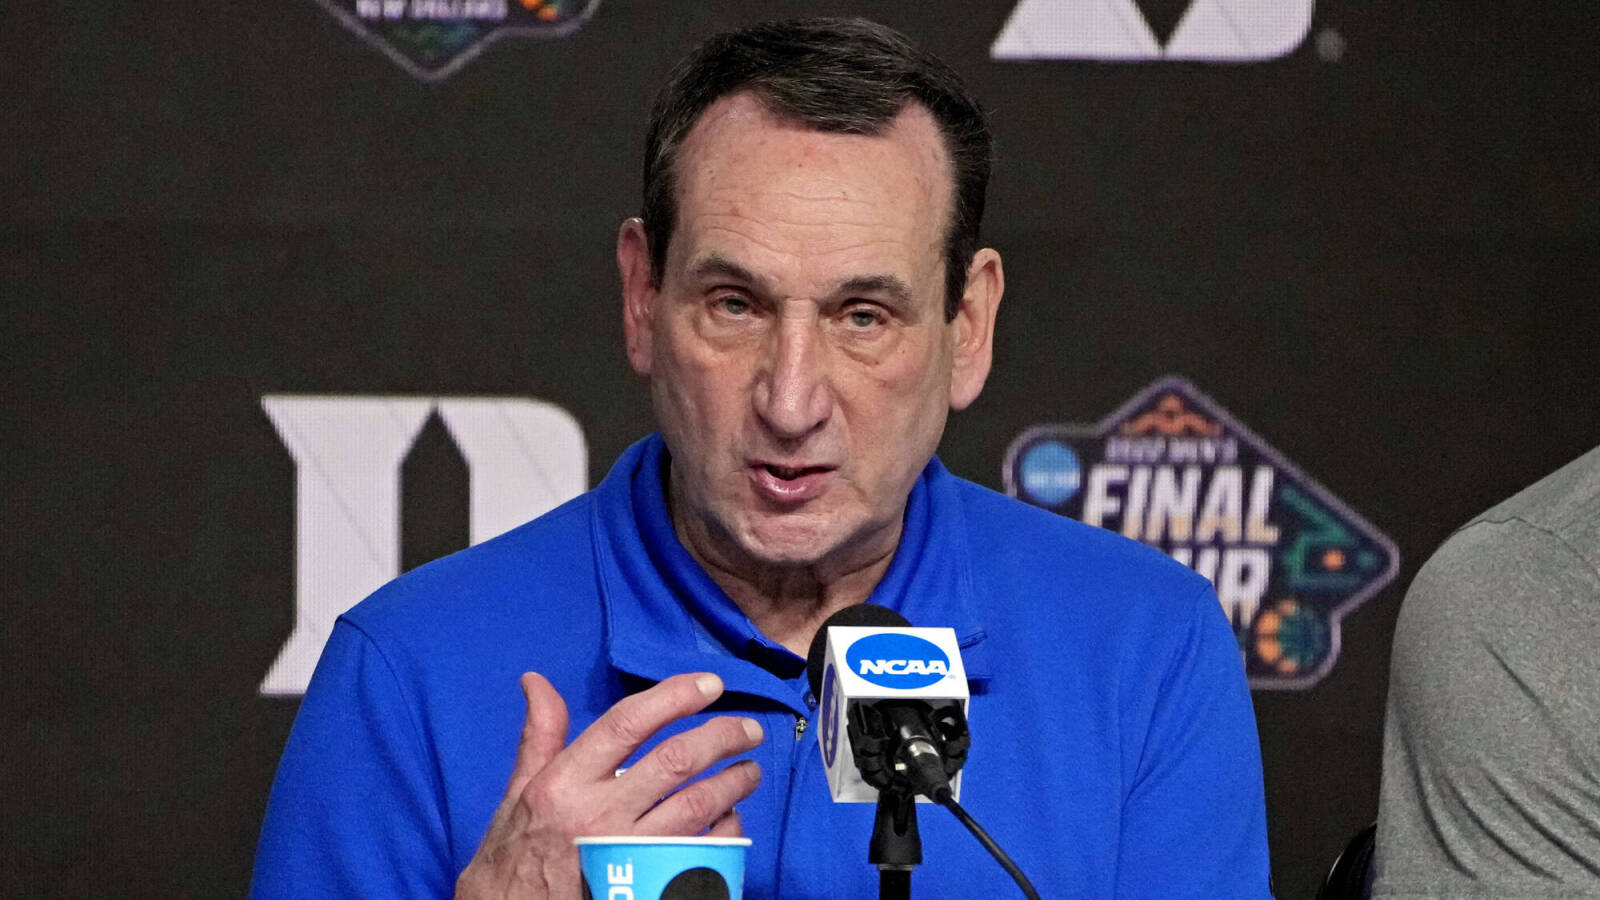 Coach K reportedly playing notable role for Lakers